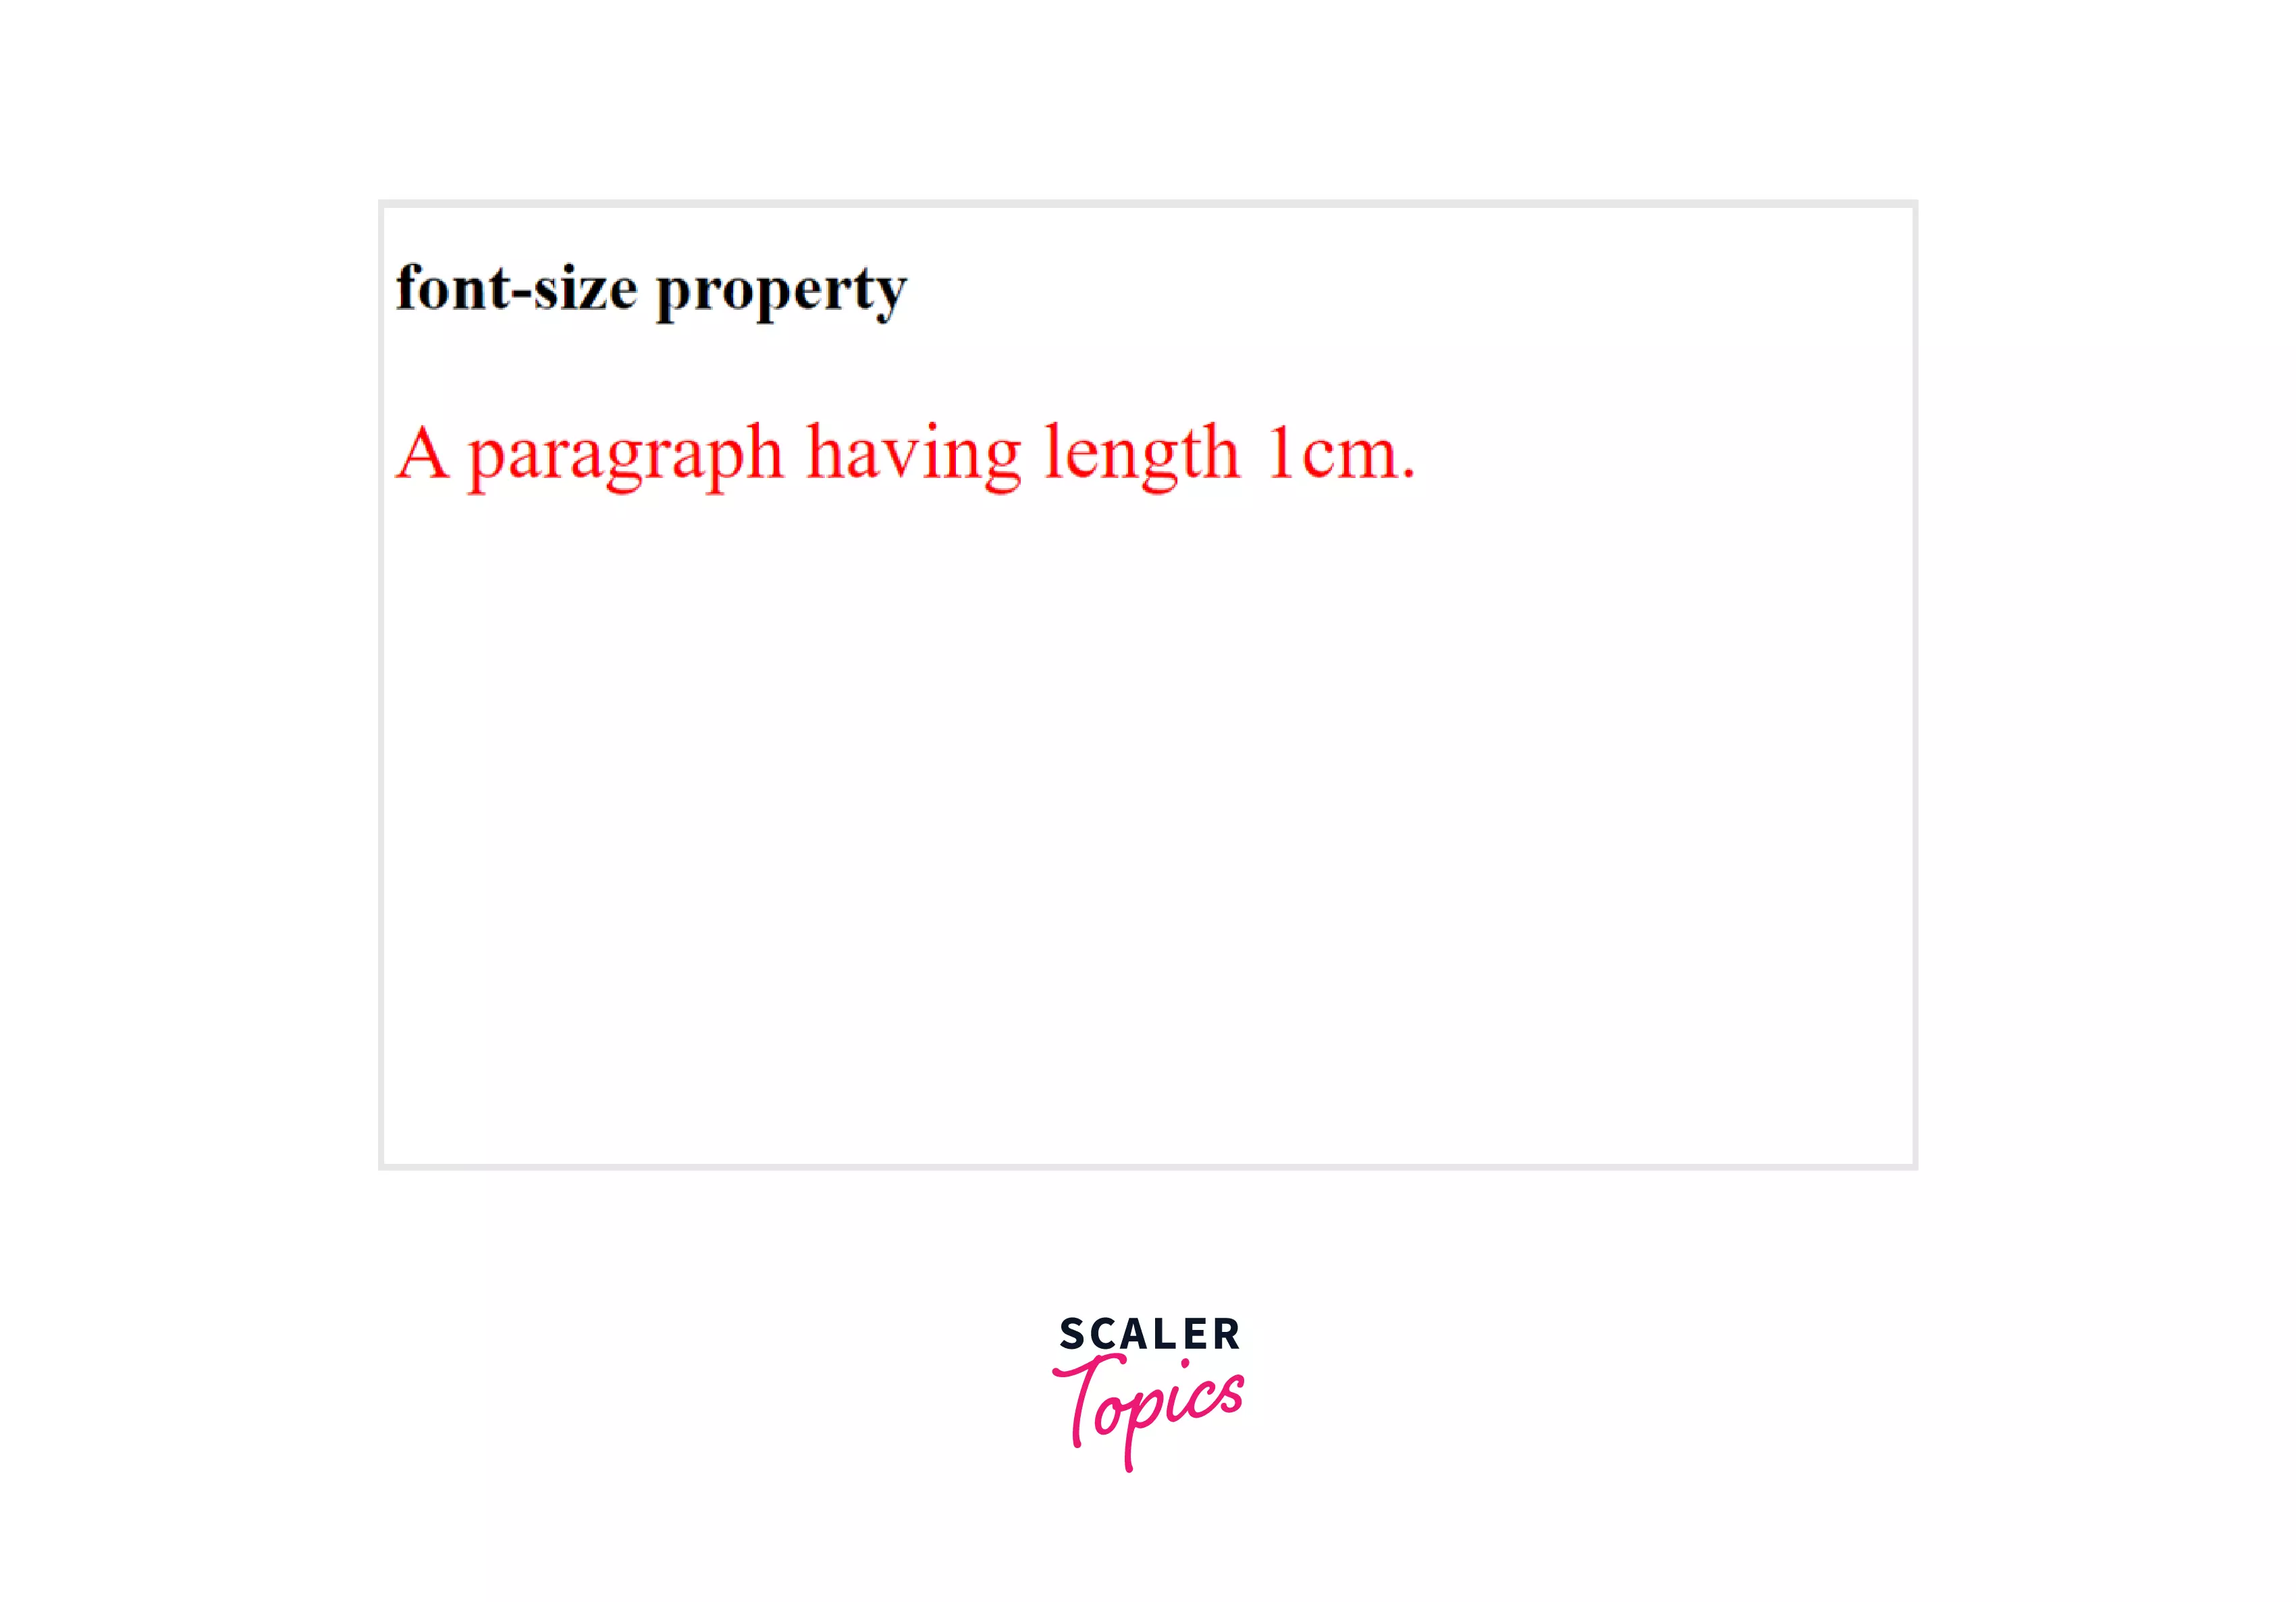 Css-font-size-property-image-2